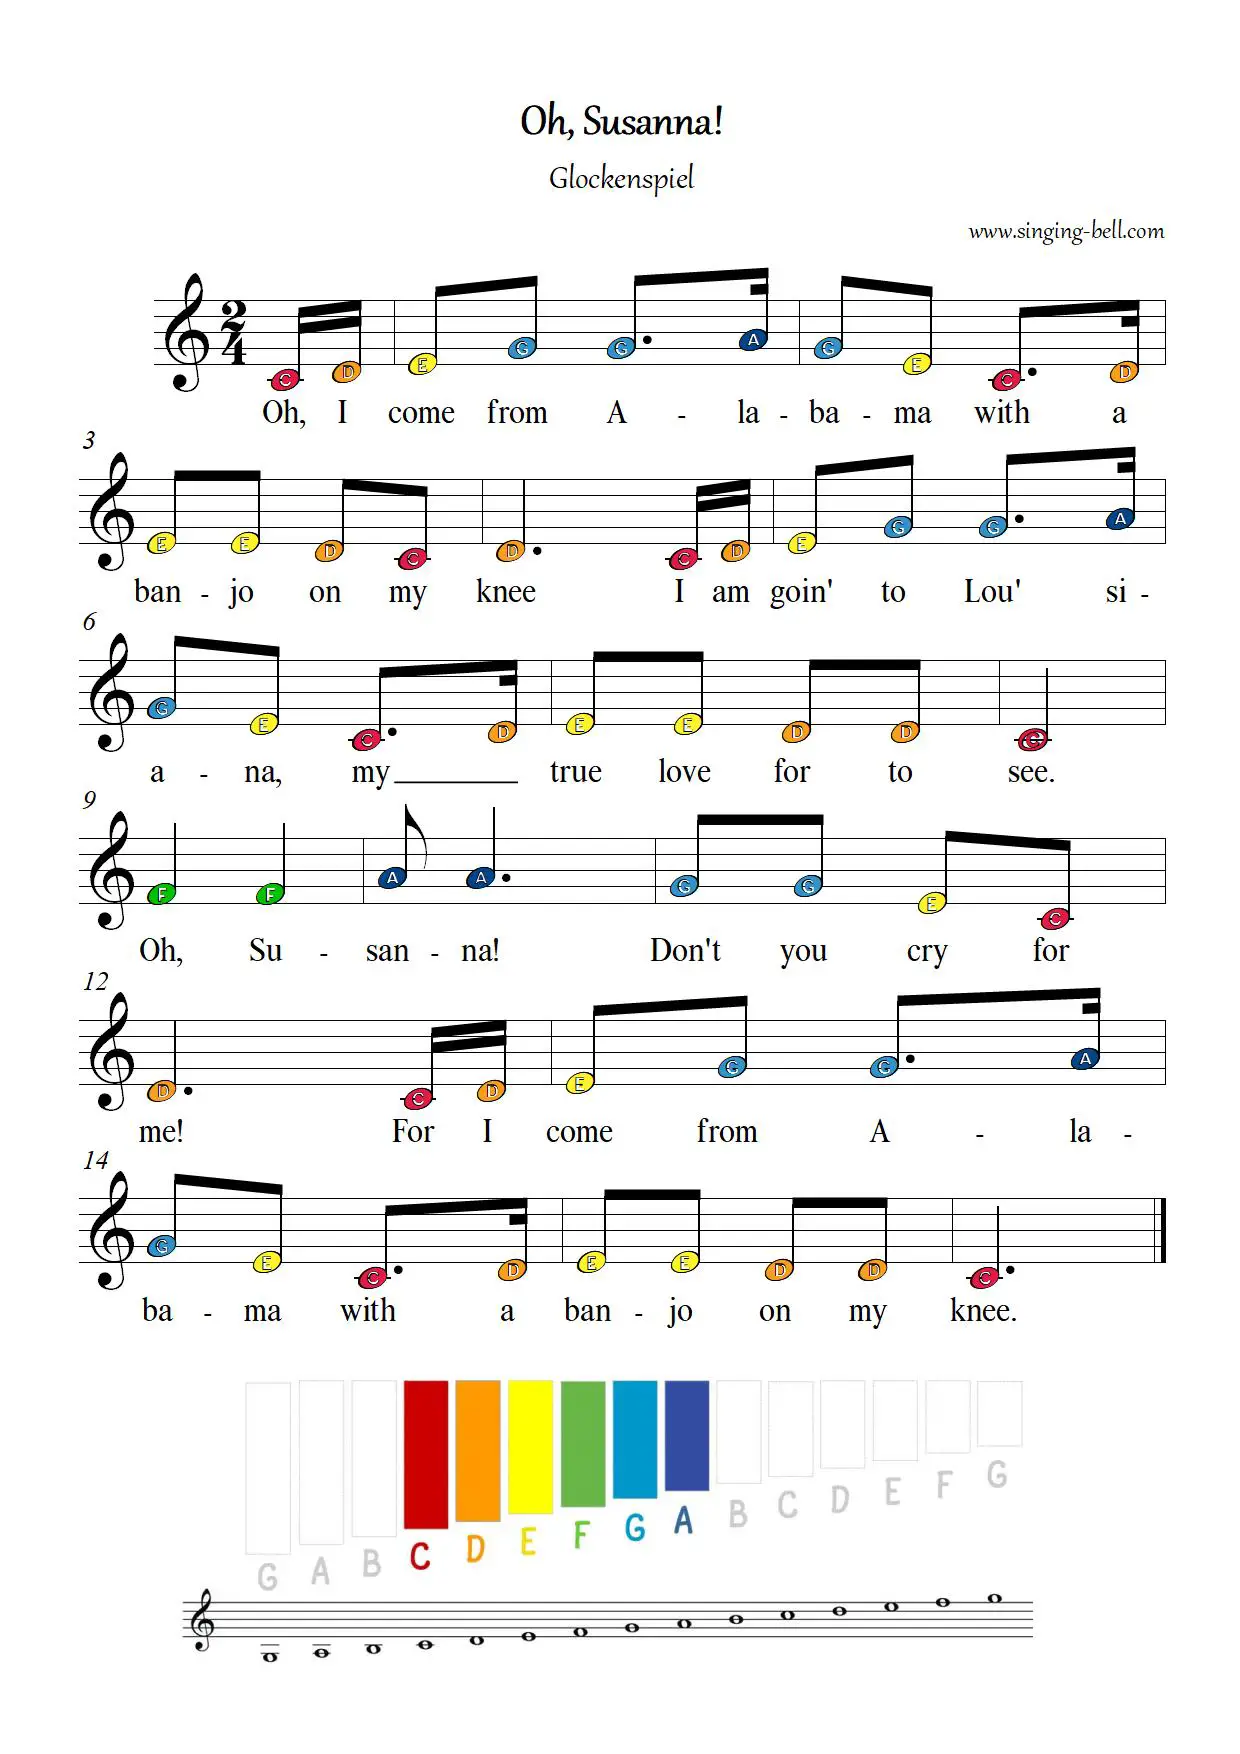 Oh Susanna free xylophone glockenspiel sheet music color notes chart pdf